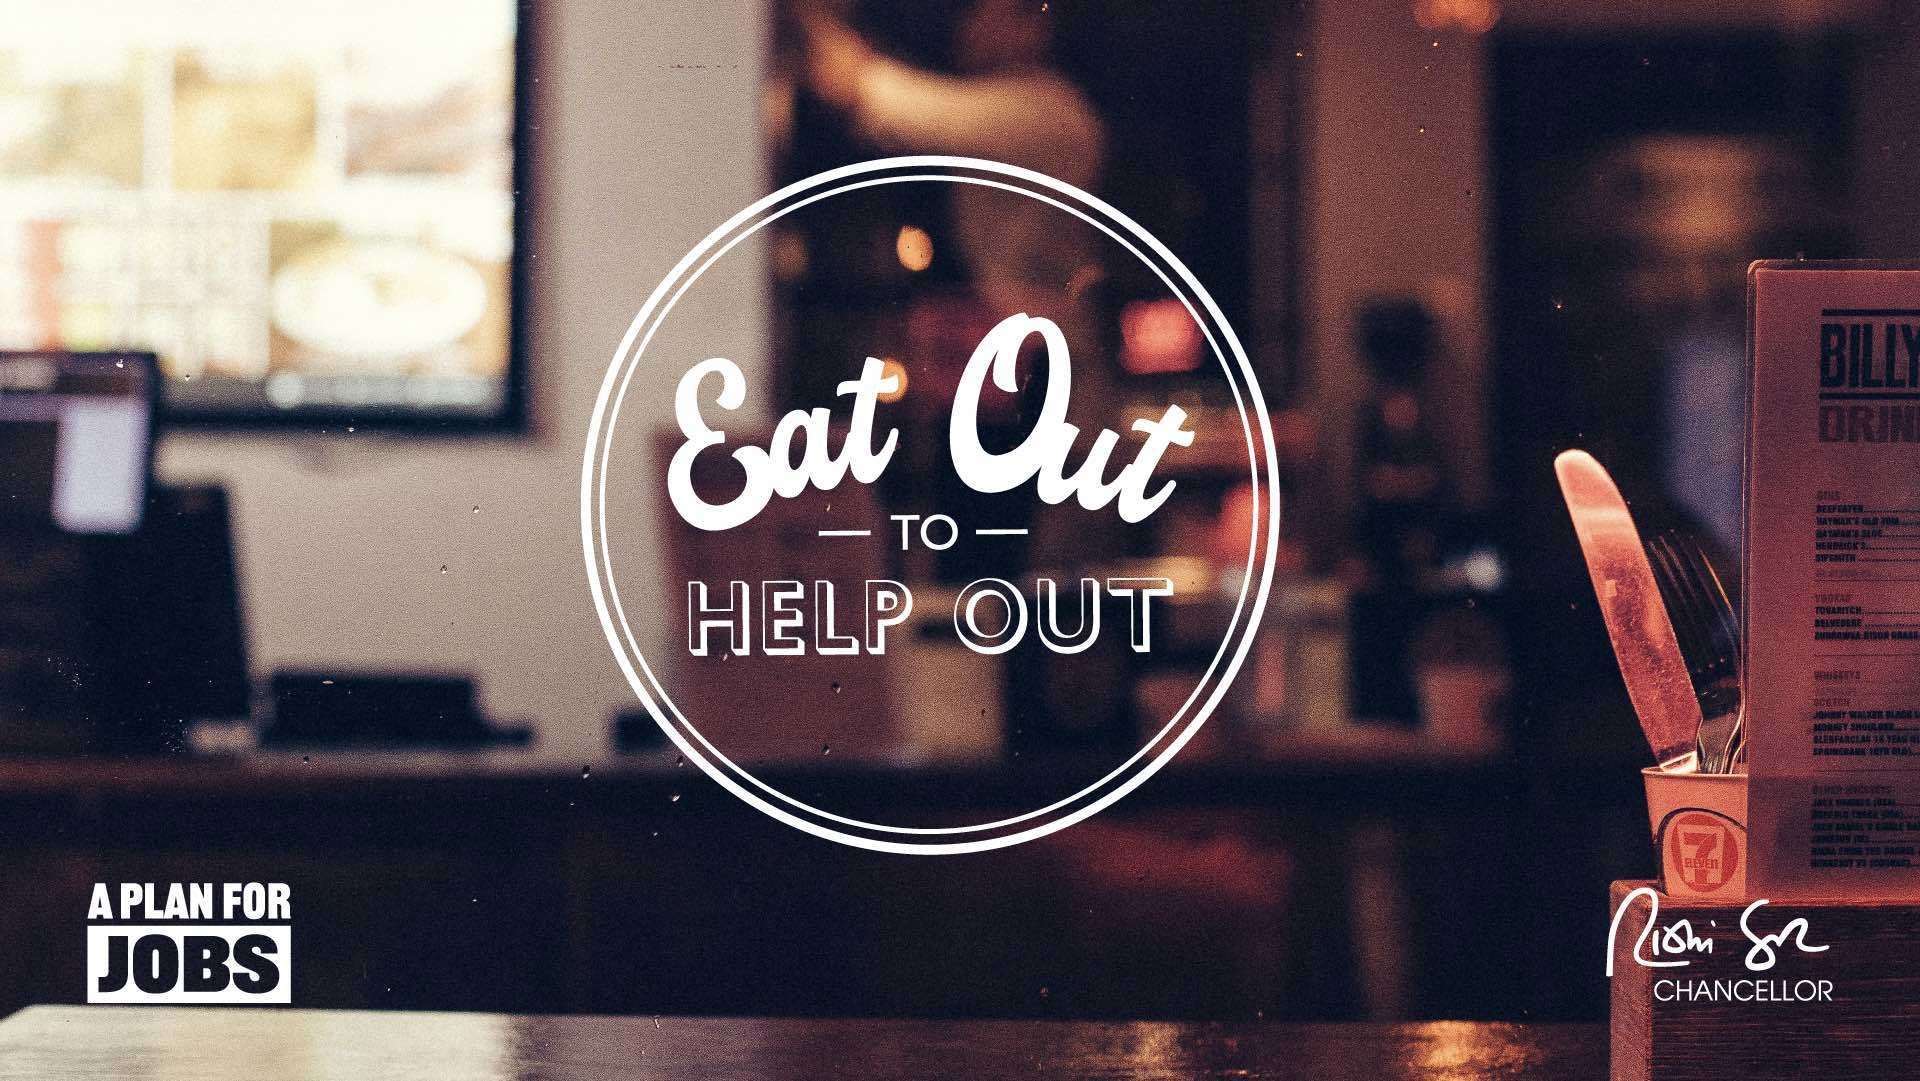 The Eat Out to Help Out scheme launches on August 3